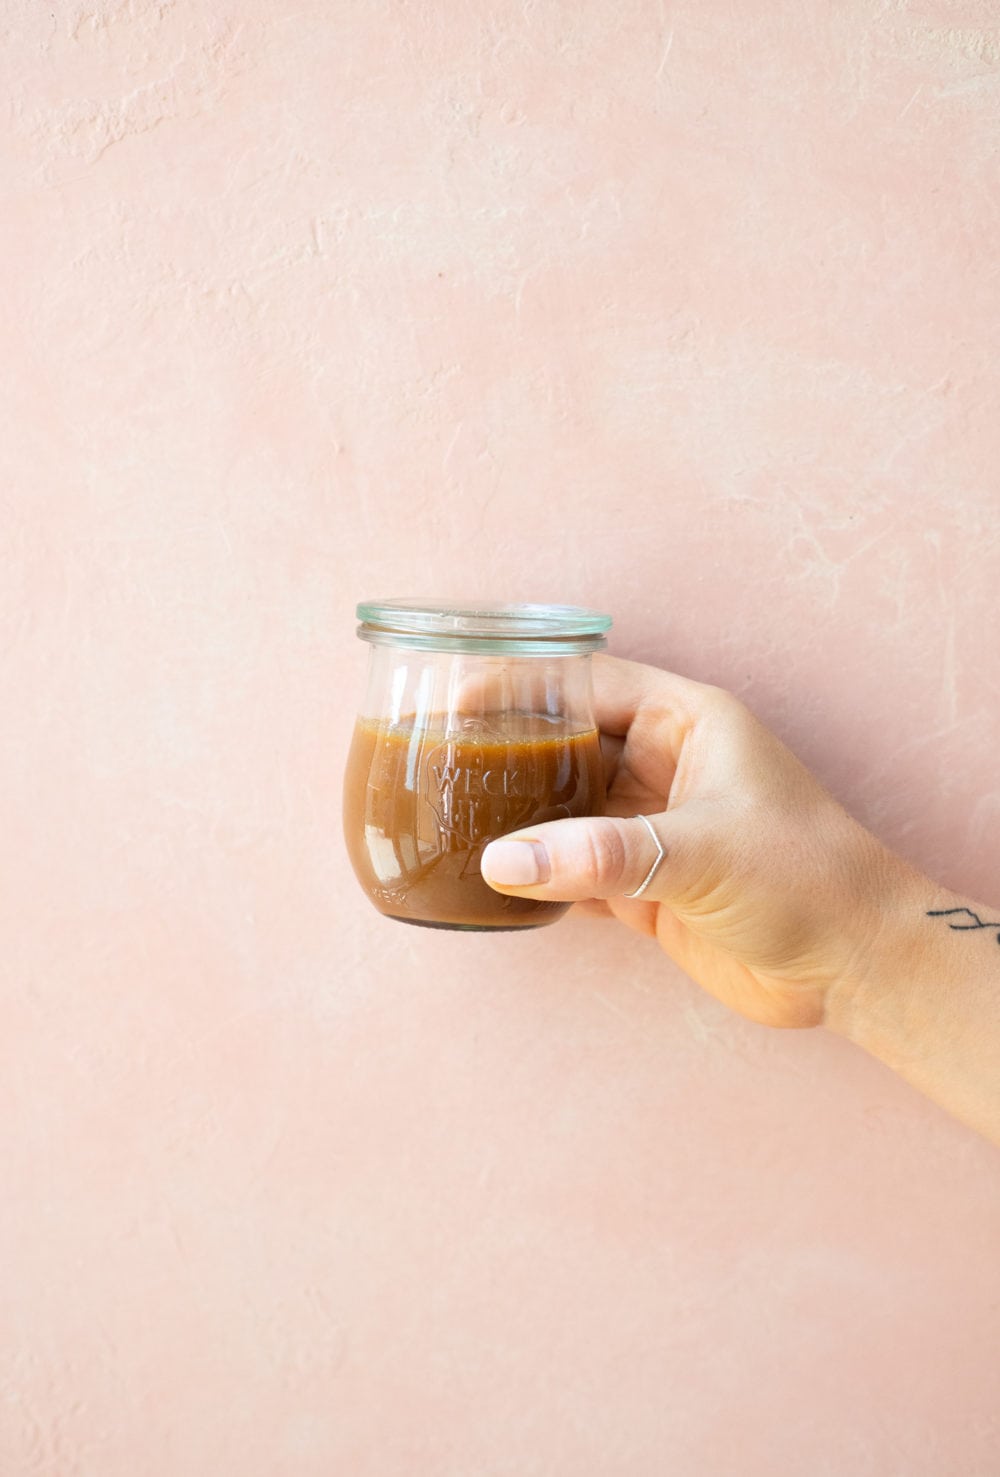 Front view of a hand holding a jar of caramel sauce against a light pink background.